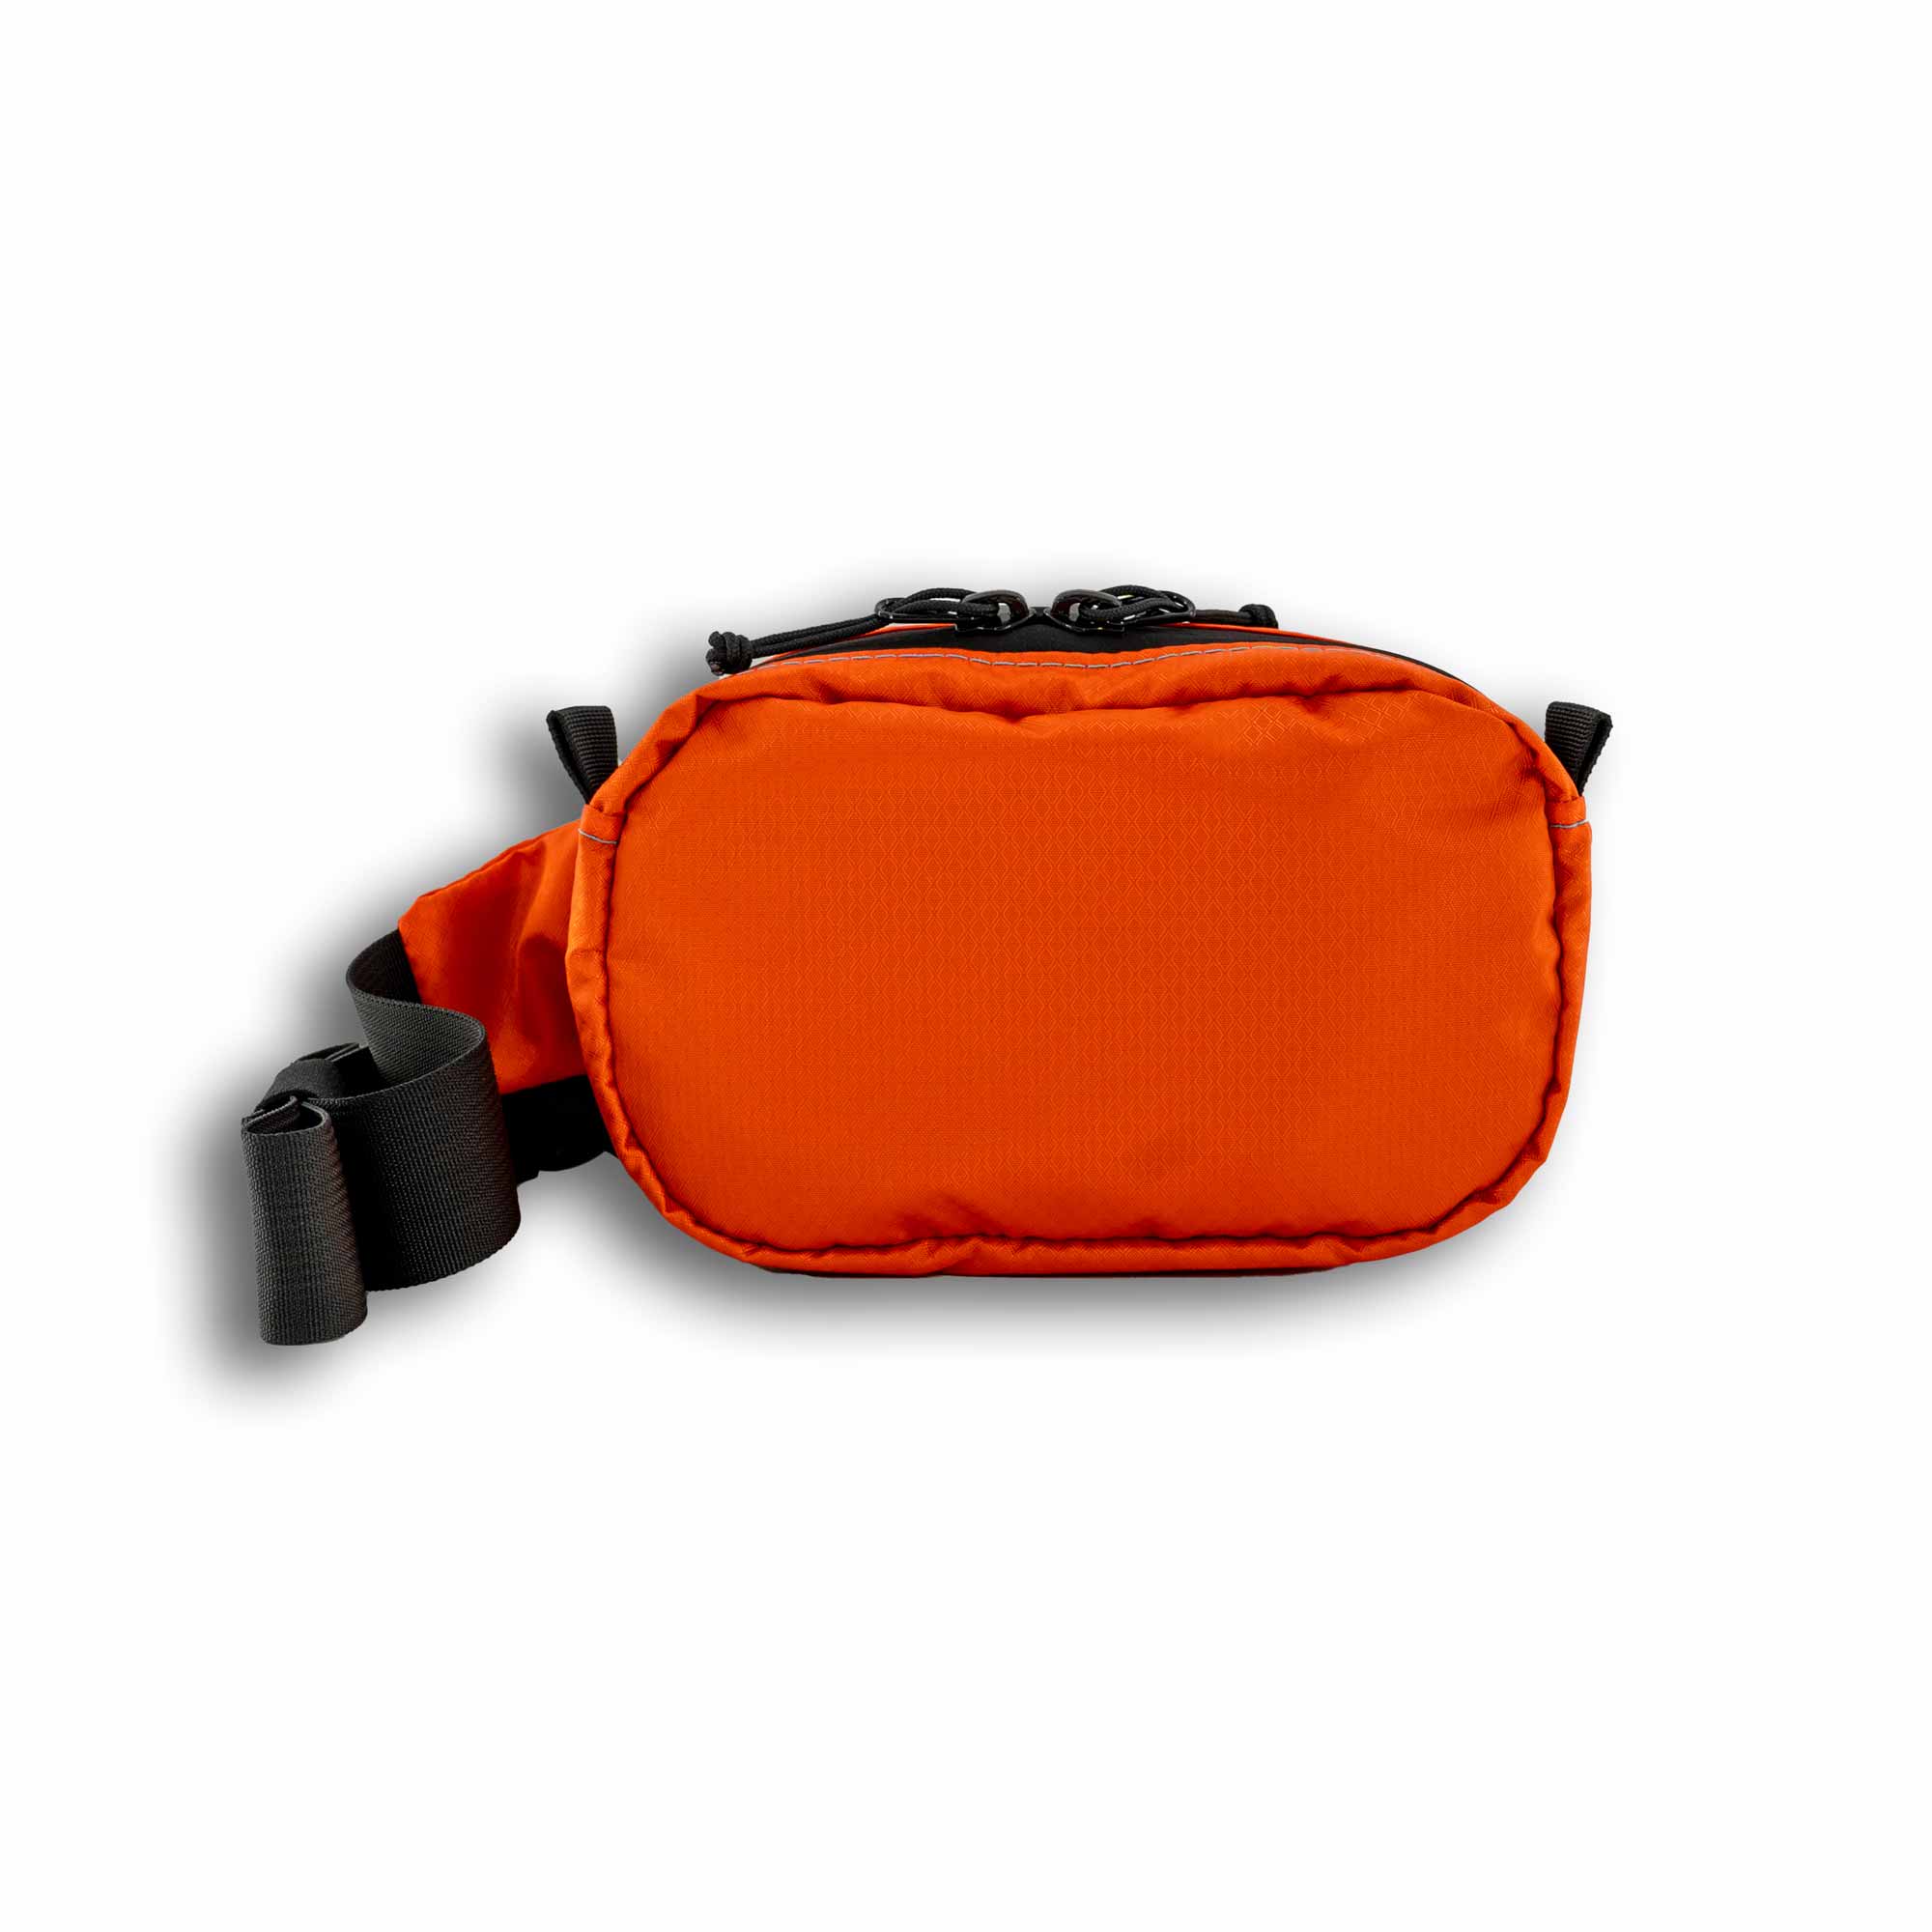 1L Hip Pack shown in orange front view